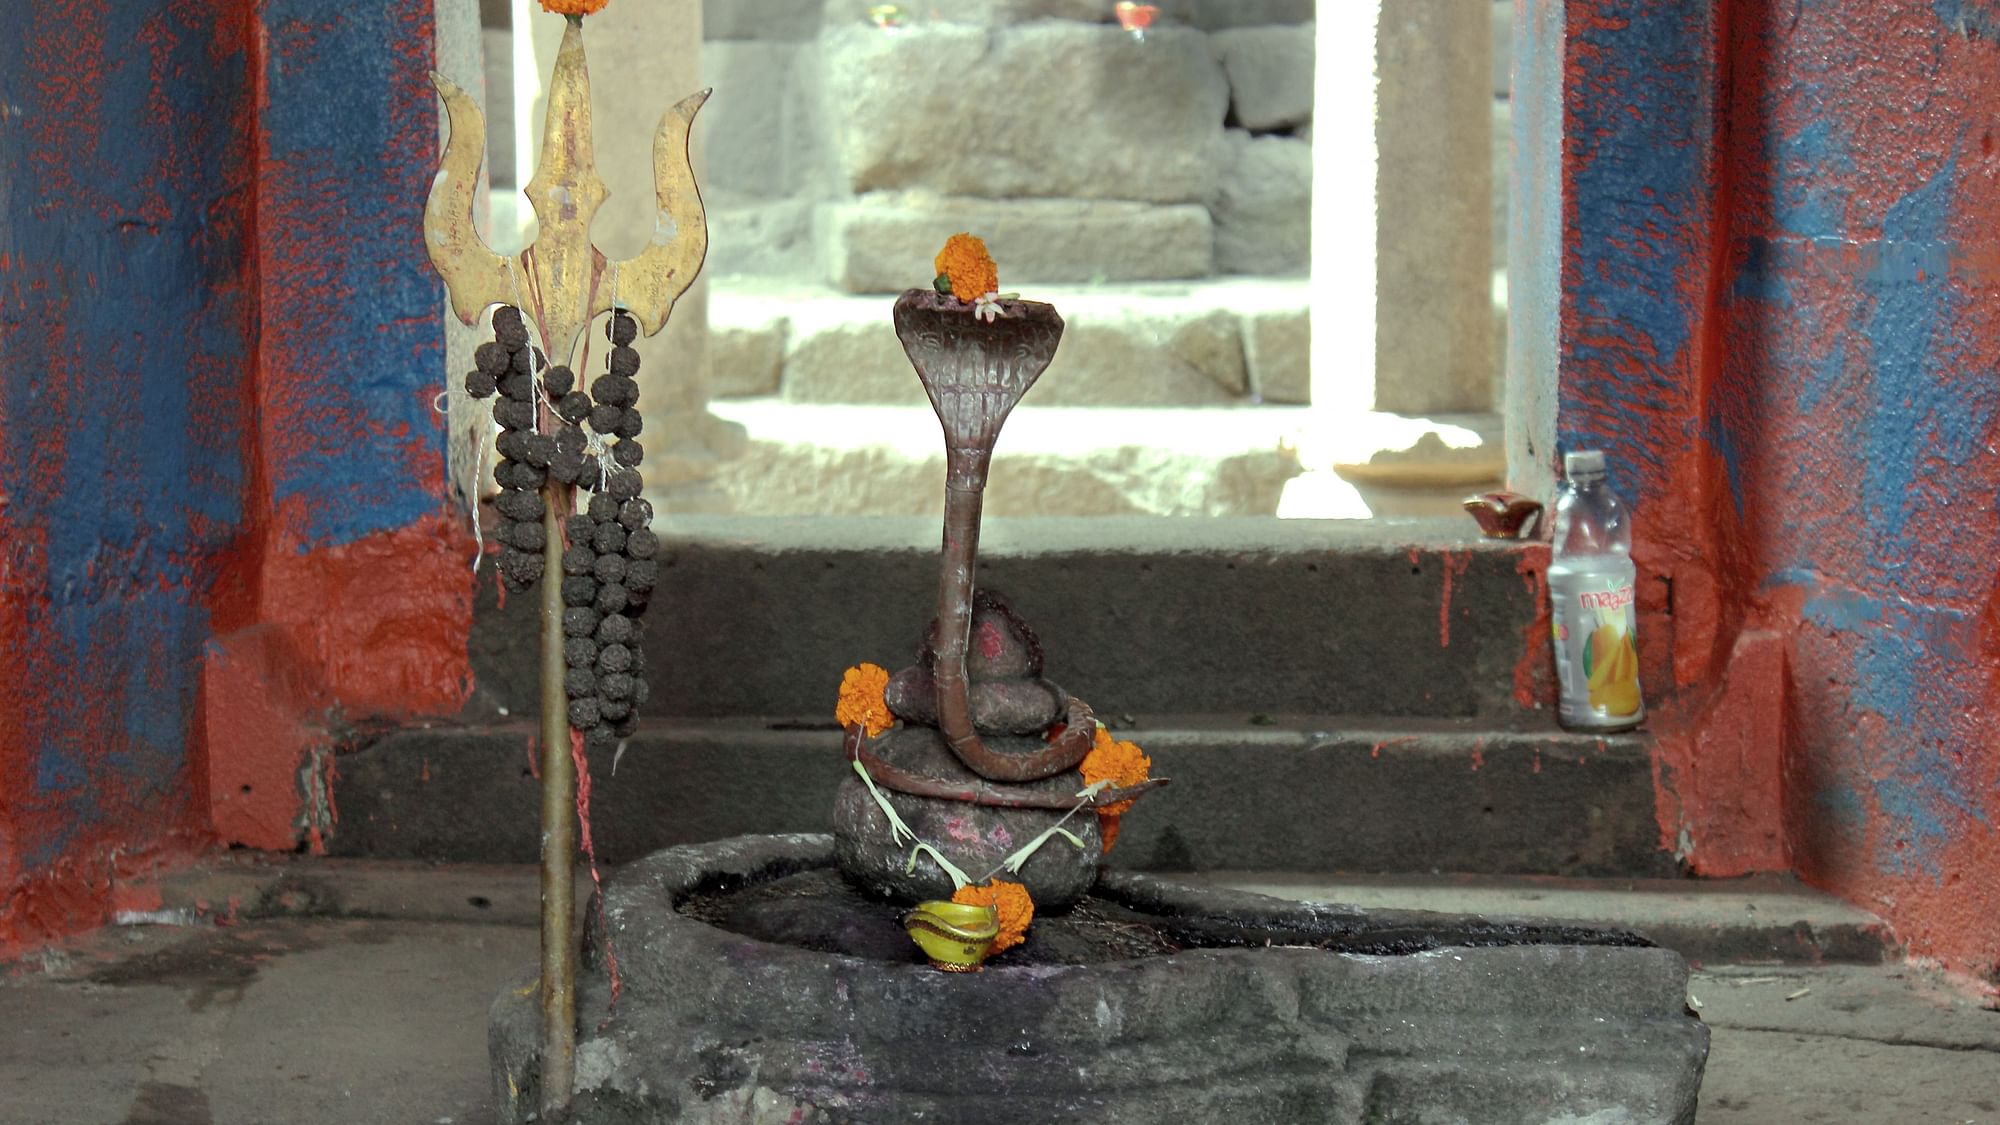 Naga Panchami 2019 Date, Time in India: Nag Panchami is celebrated on the fifth day of Shukla Paksha in the month of Sawan.